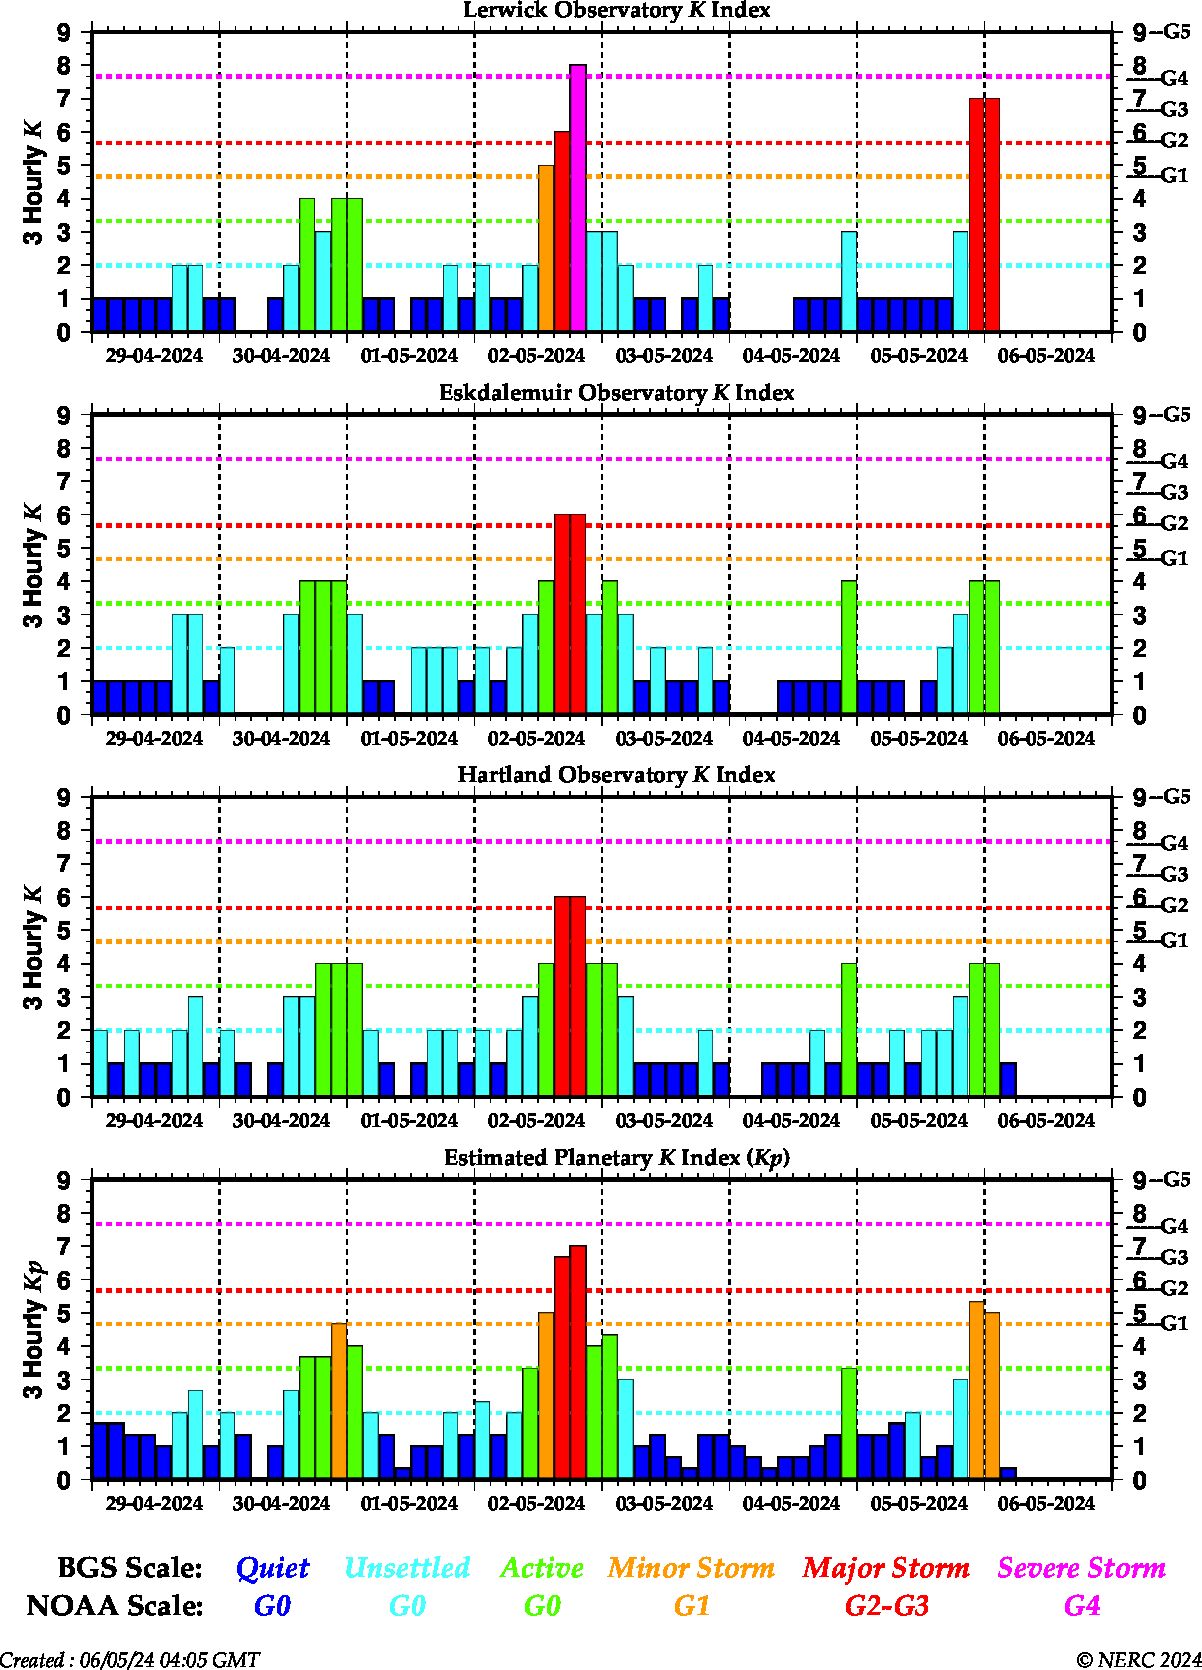 Chart showing the current and recent geomagnetic activity in the UK and globally. The K-index values for the 3 UK observatories and the estimated global Kp is shown.